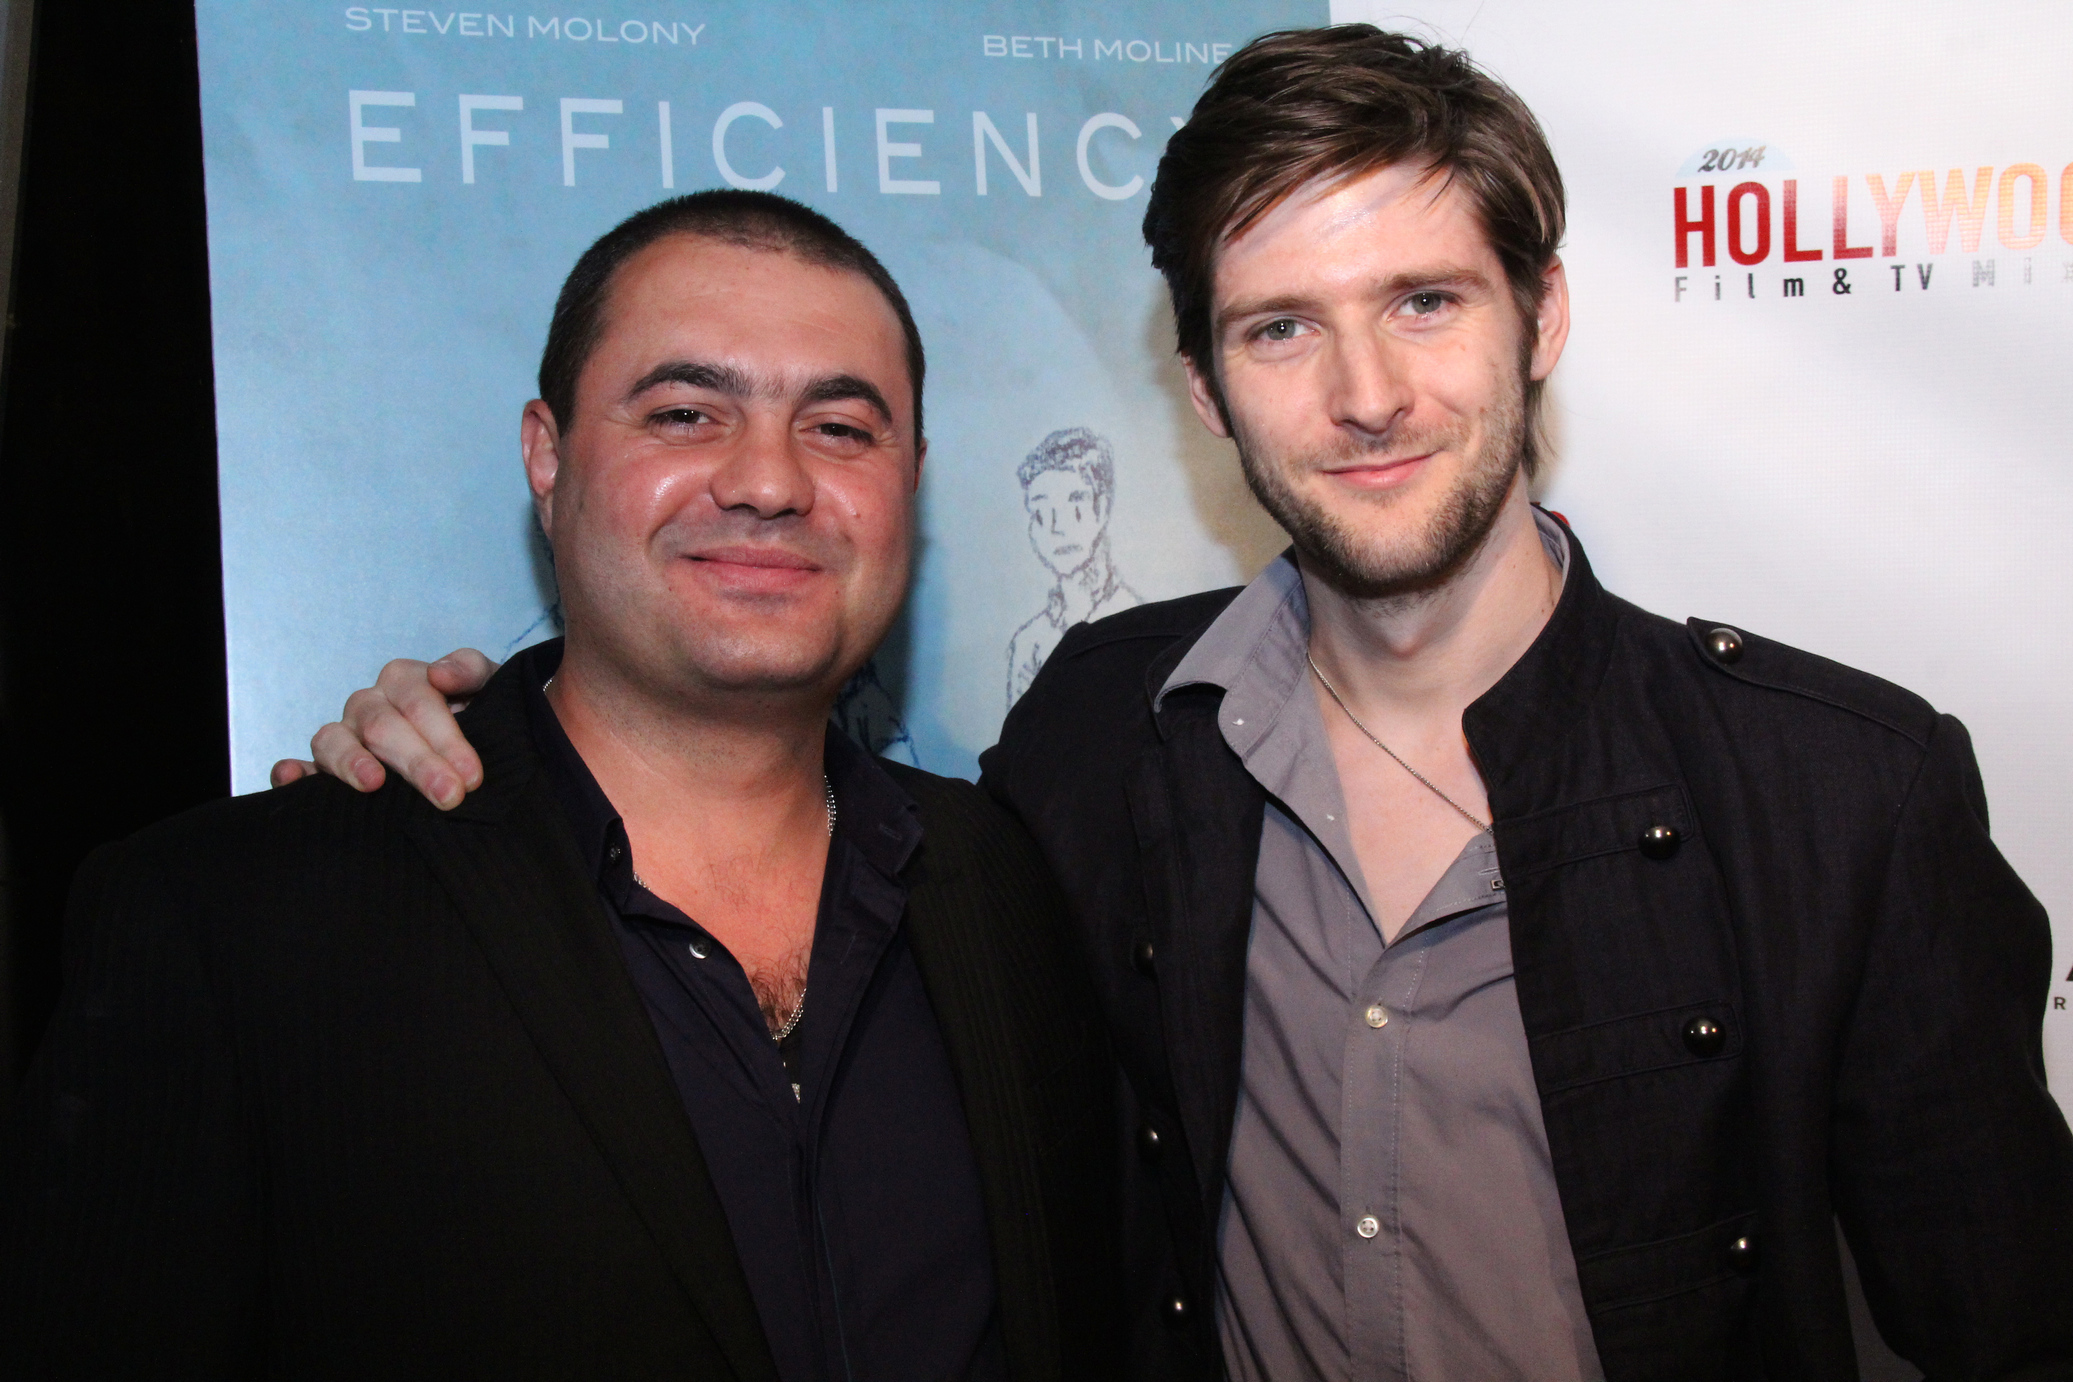 Representing Efficiency at the Hollywood Film & TV Mixer at Sofitel Hotel in Beverly Hills.